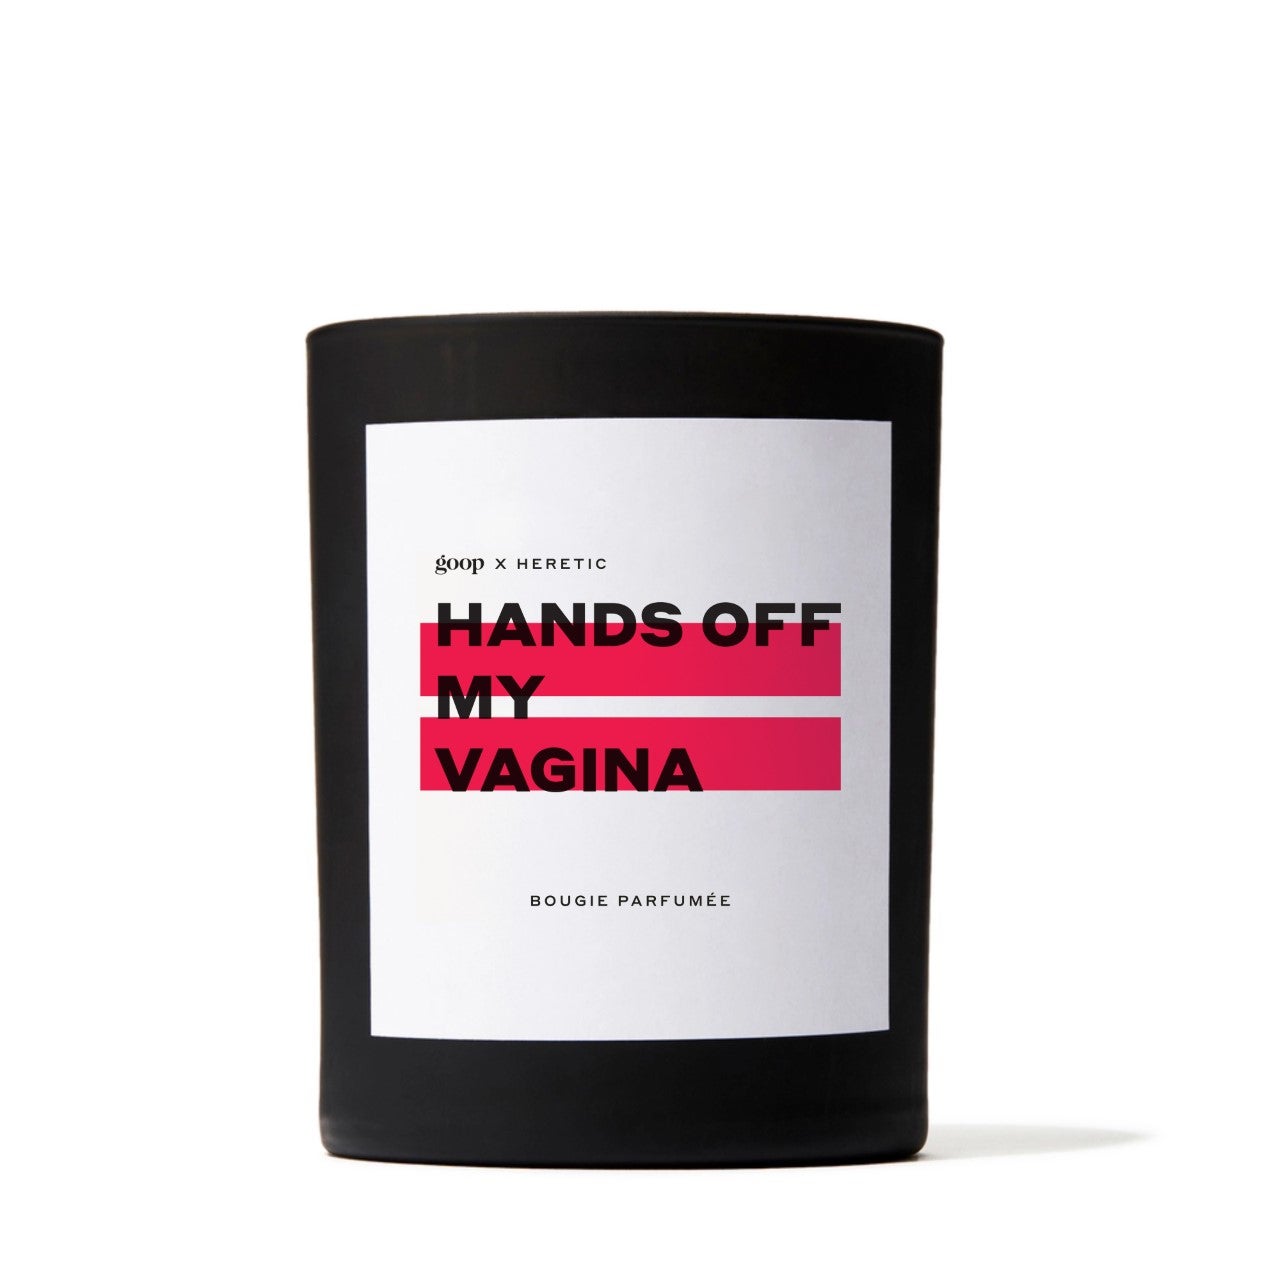 Goop launches new candle in support of reproductive rights